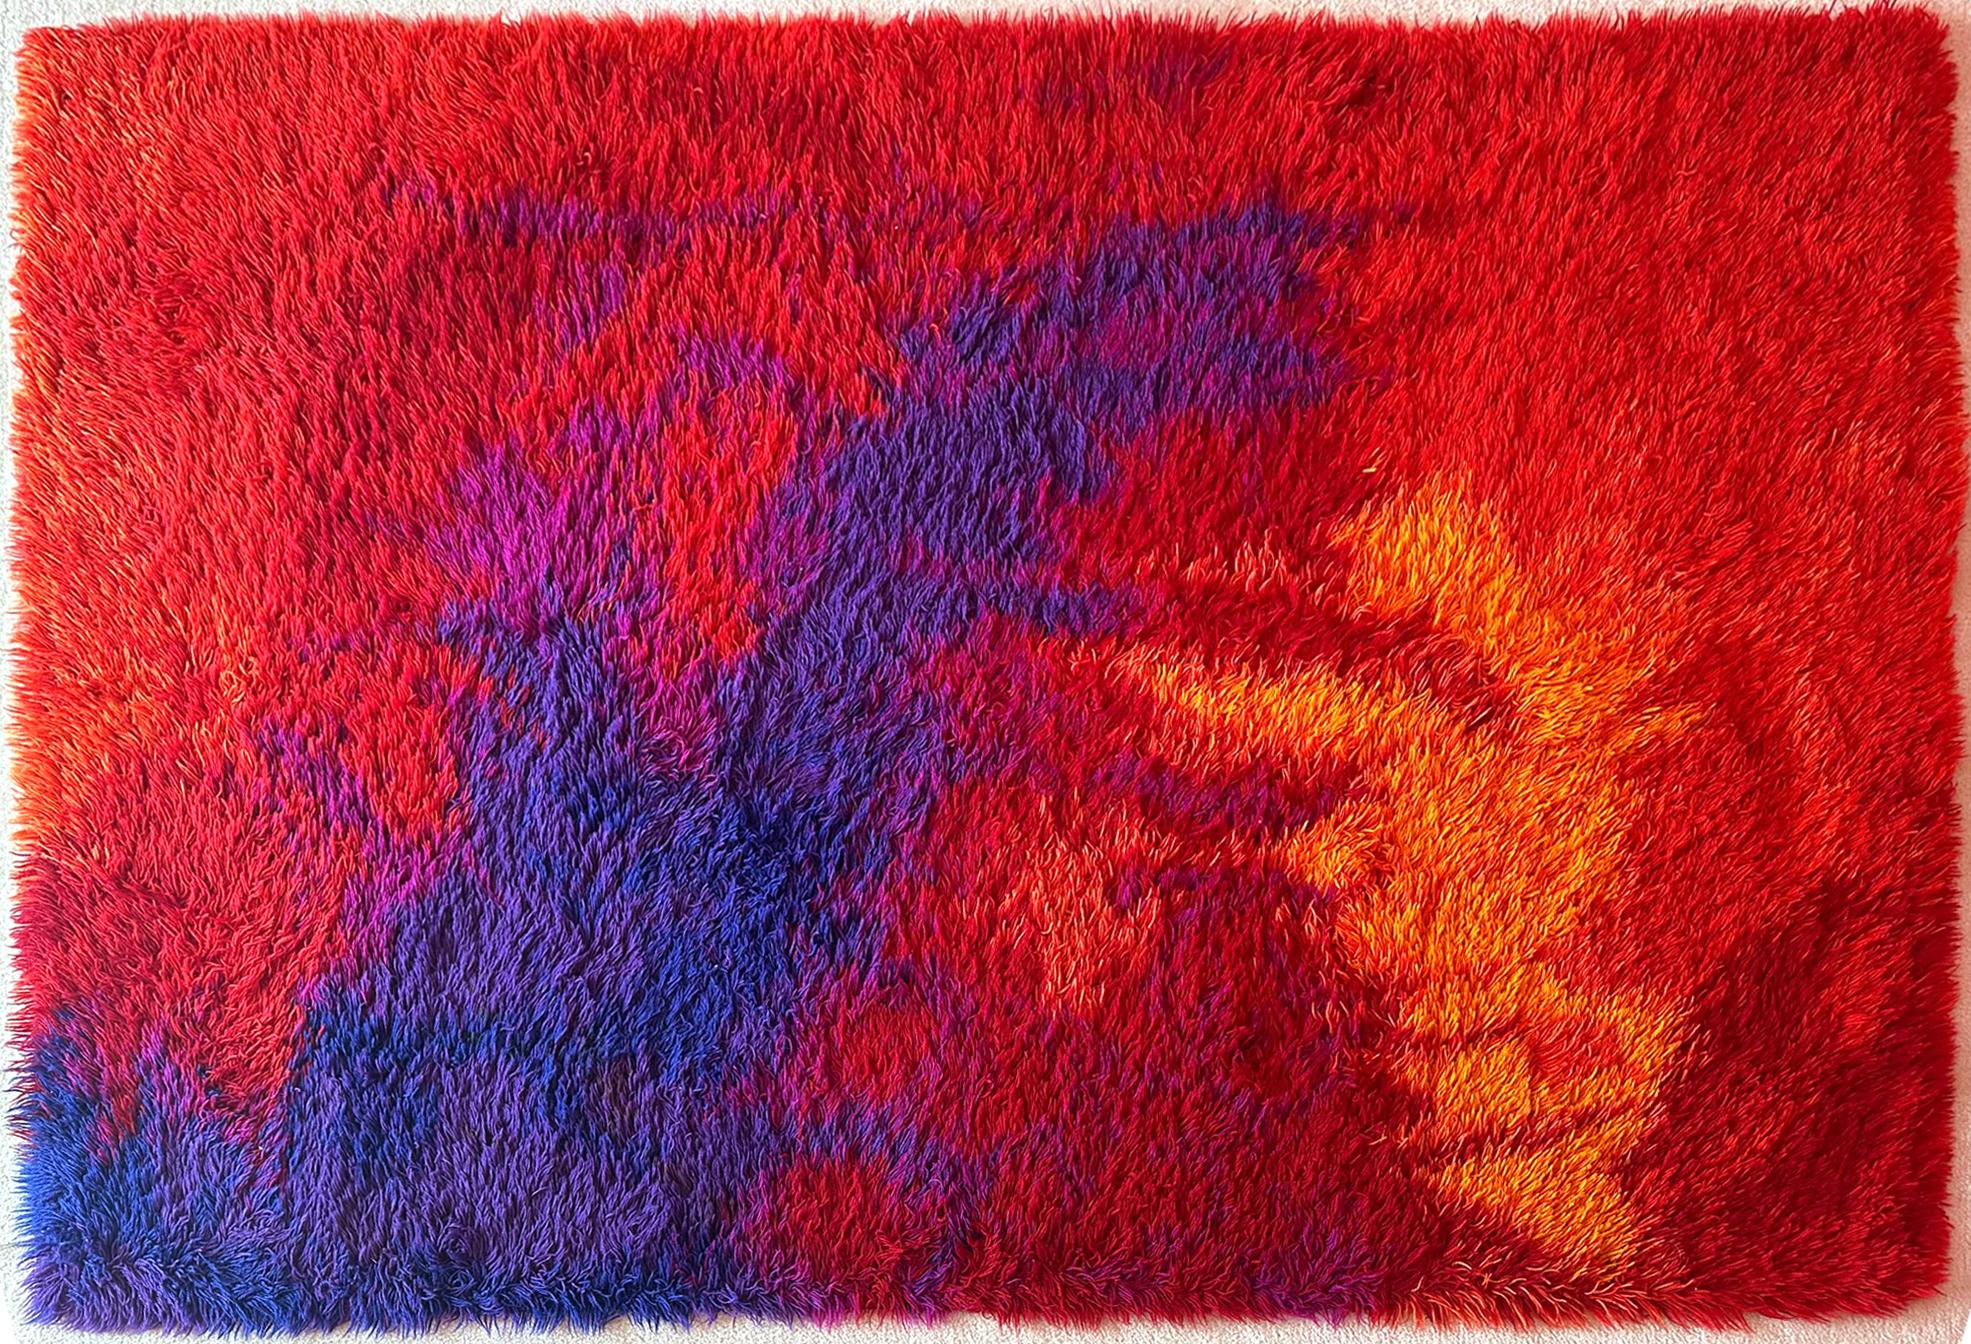 A vintage Danish area wool rug made by Unikataeppe in Denmark circa 1960s. The bright colored rug features long shaggy fibers and remains in very good condition. On the background of mottled red colors in subtle different shades, splashes of cobalt